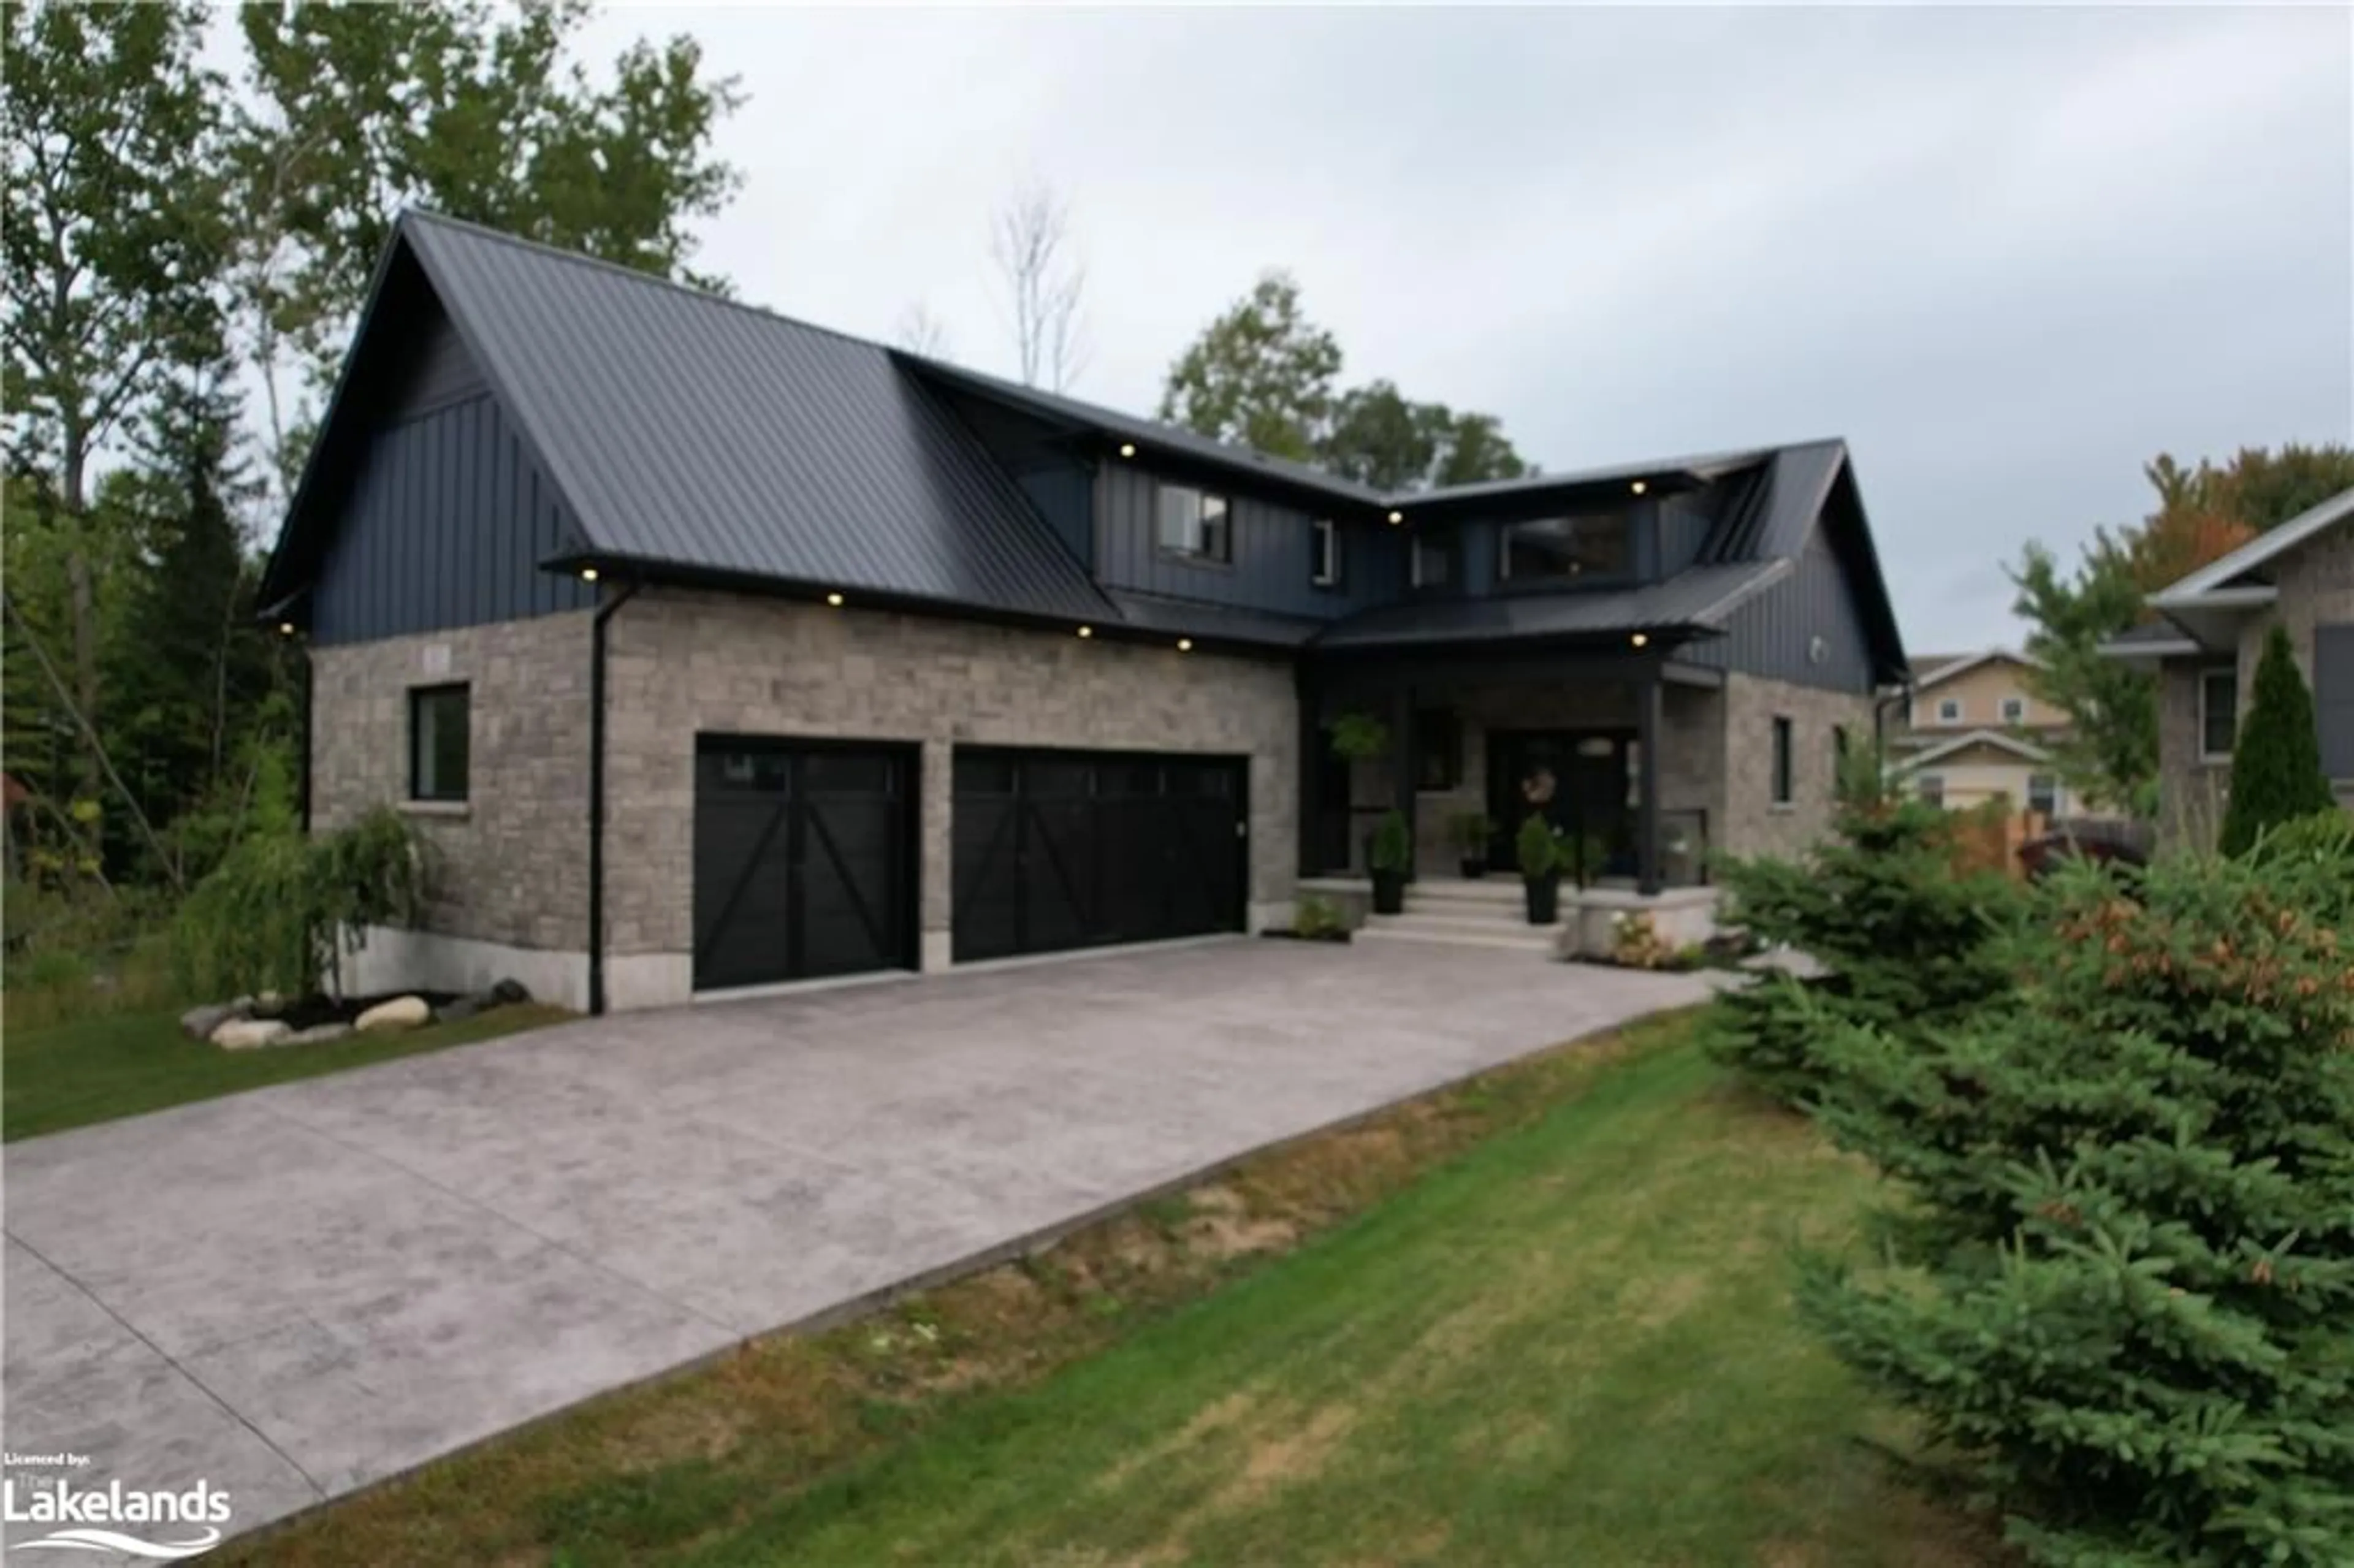 Home with brick exterior material for 107 Ottawa Ave, Southampton Ontario N0H 2L0